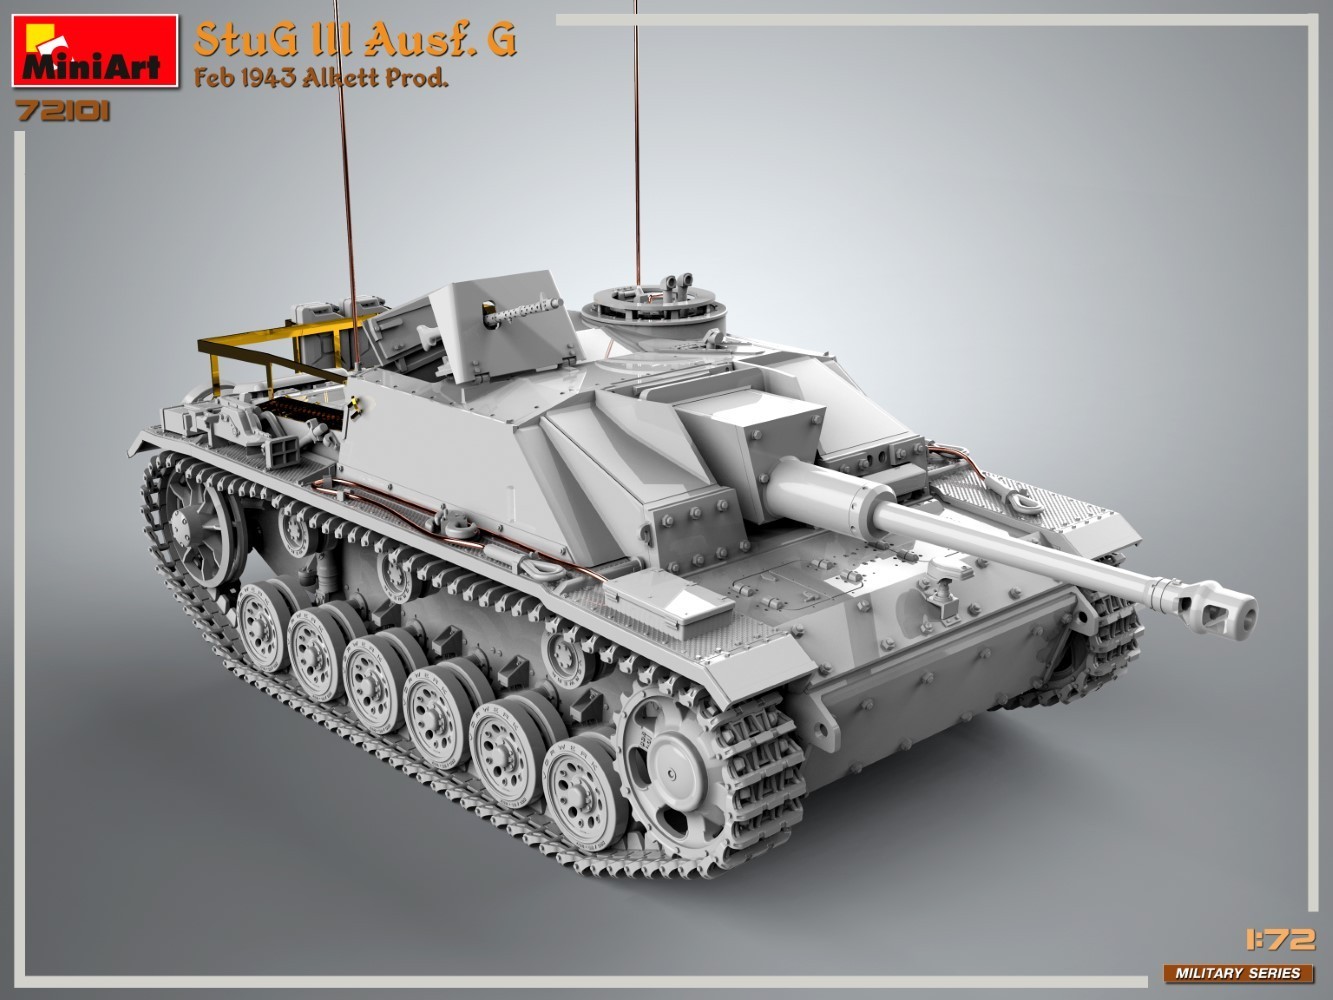 New Military Series Announced in 1/72 Scale, Starting with StuG III Ausf. G CAD-3